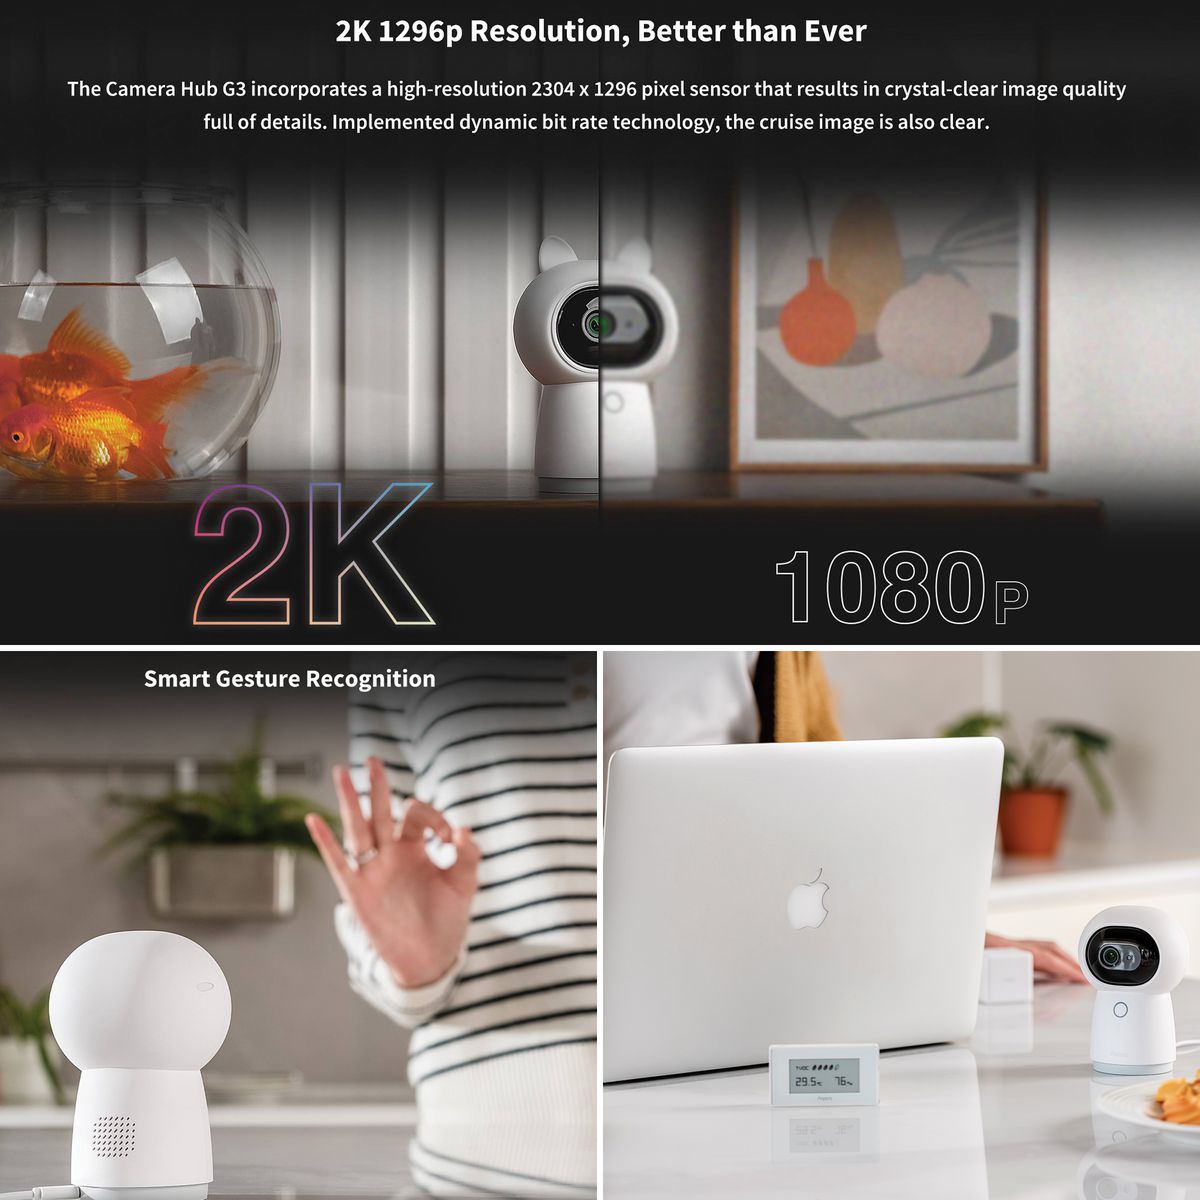 Aqara G2H Smart Camera With 1080P HD Night Vision For Apple HomeKit APP  Monitoring And Zigbee Smart Cameras For Home Security From Mi_face, $54.94